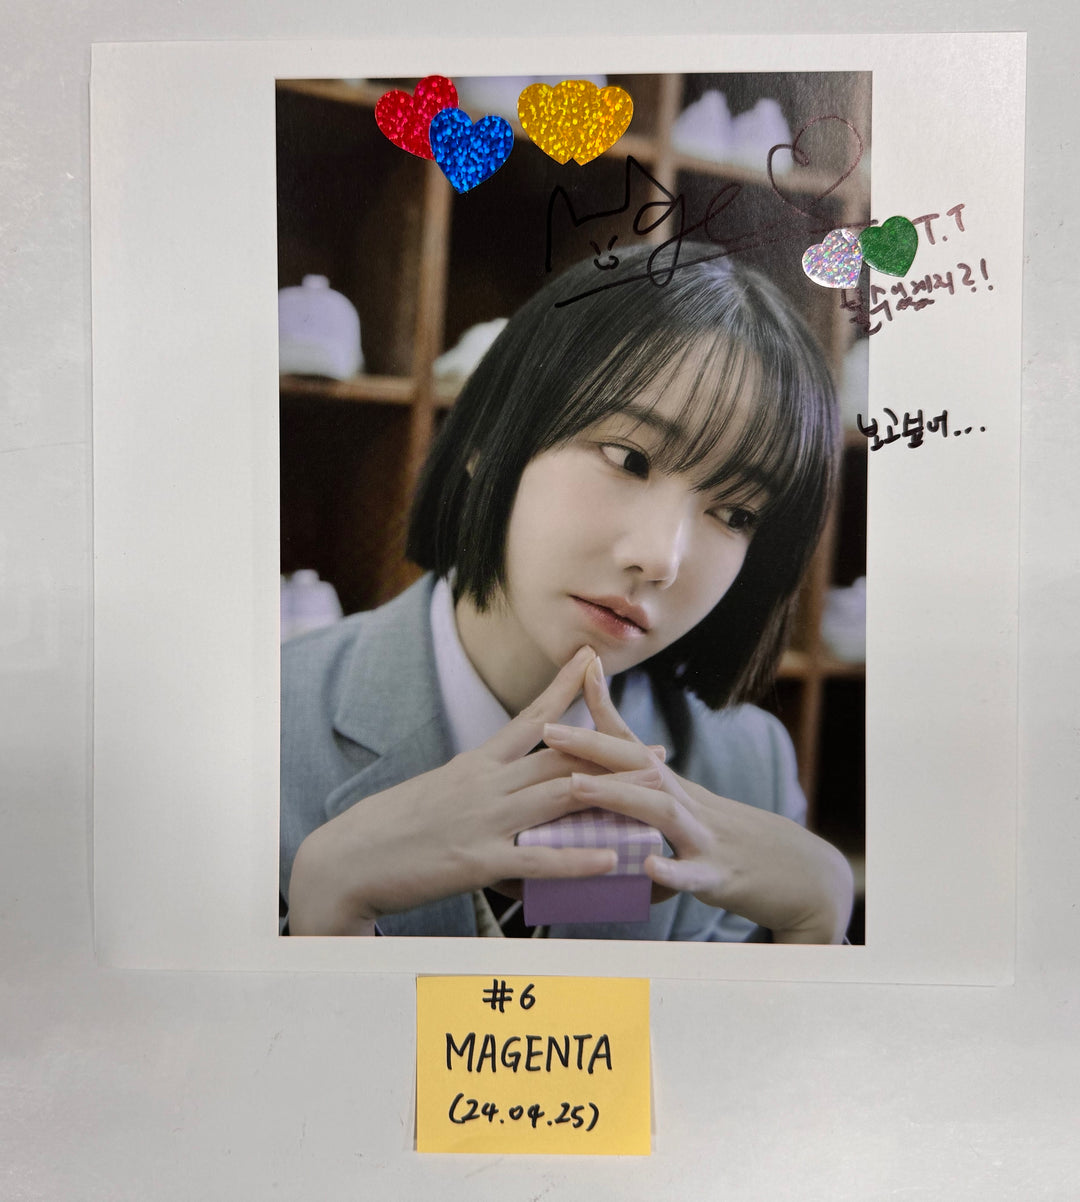 QWER "MANITO" - A Cut Page From Fansign Event Album [24.4.25]